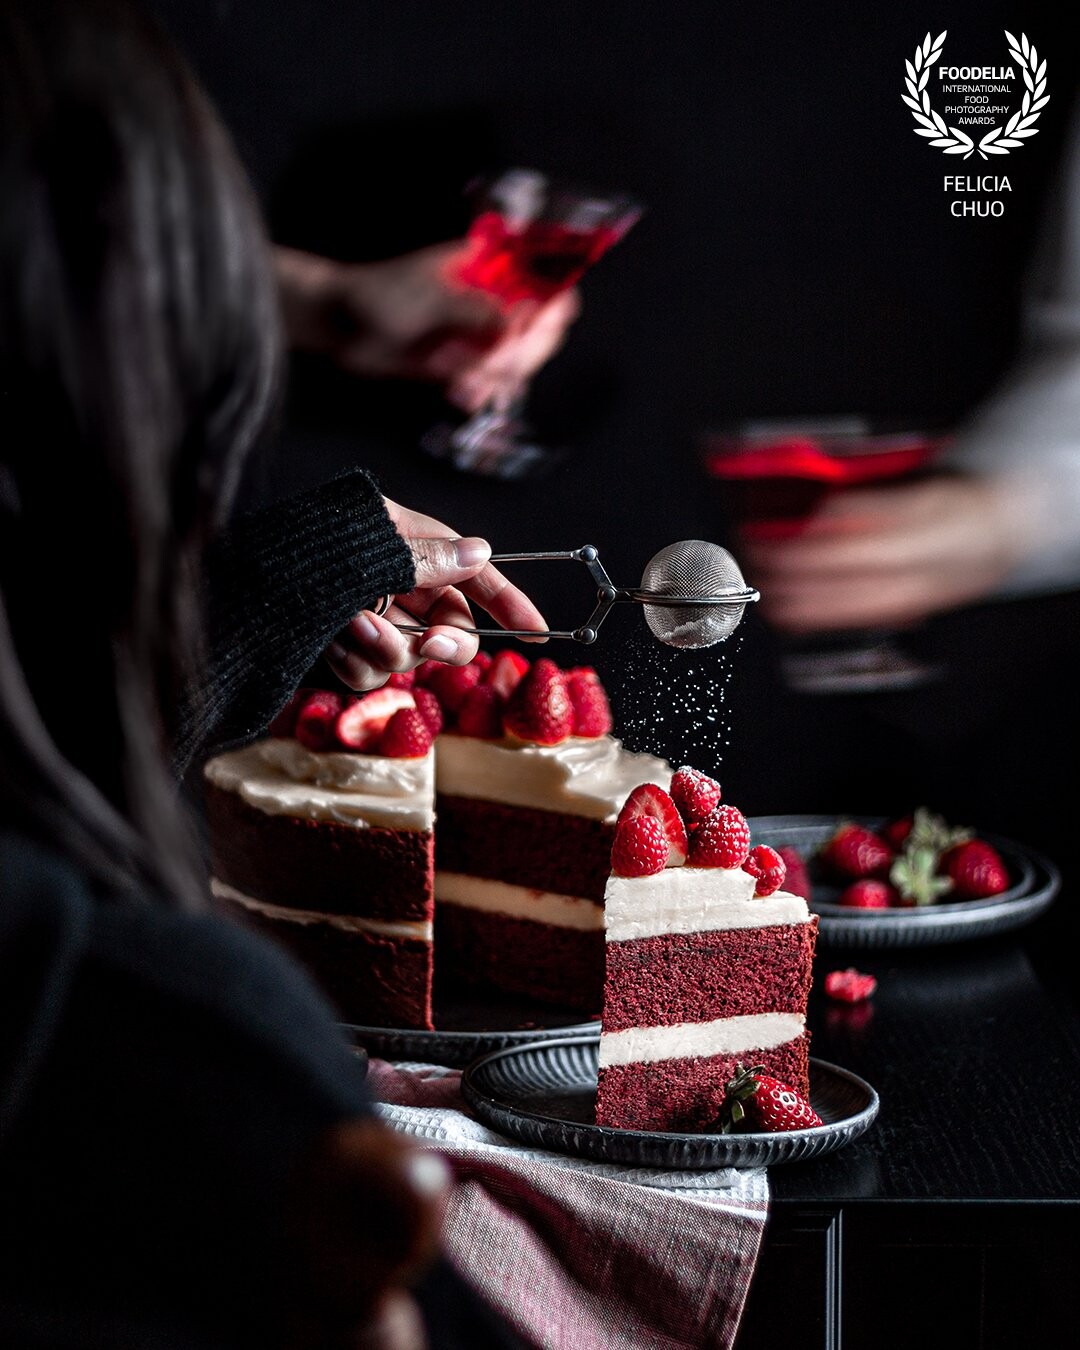 Red velvet cake with a juxtaposition of blurred and frozen movement. Composited together in Photoshop. Although it is a crowded scene, my aim was to still lead the eye back to the hero slice.